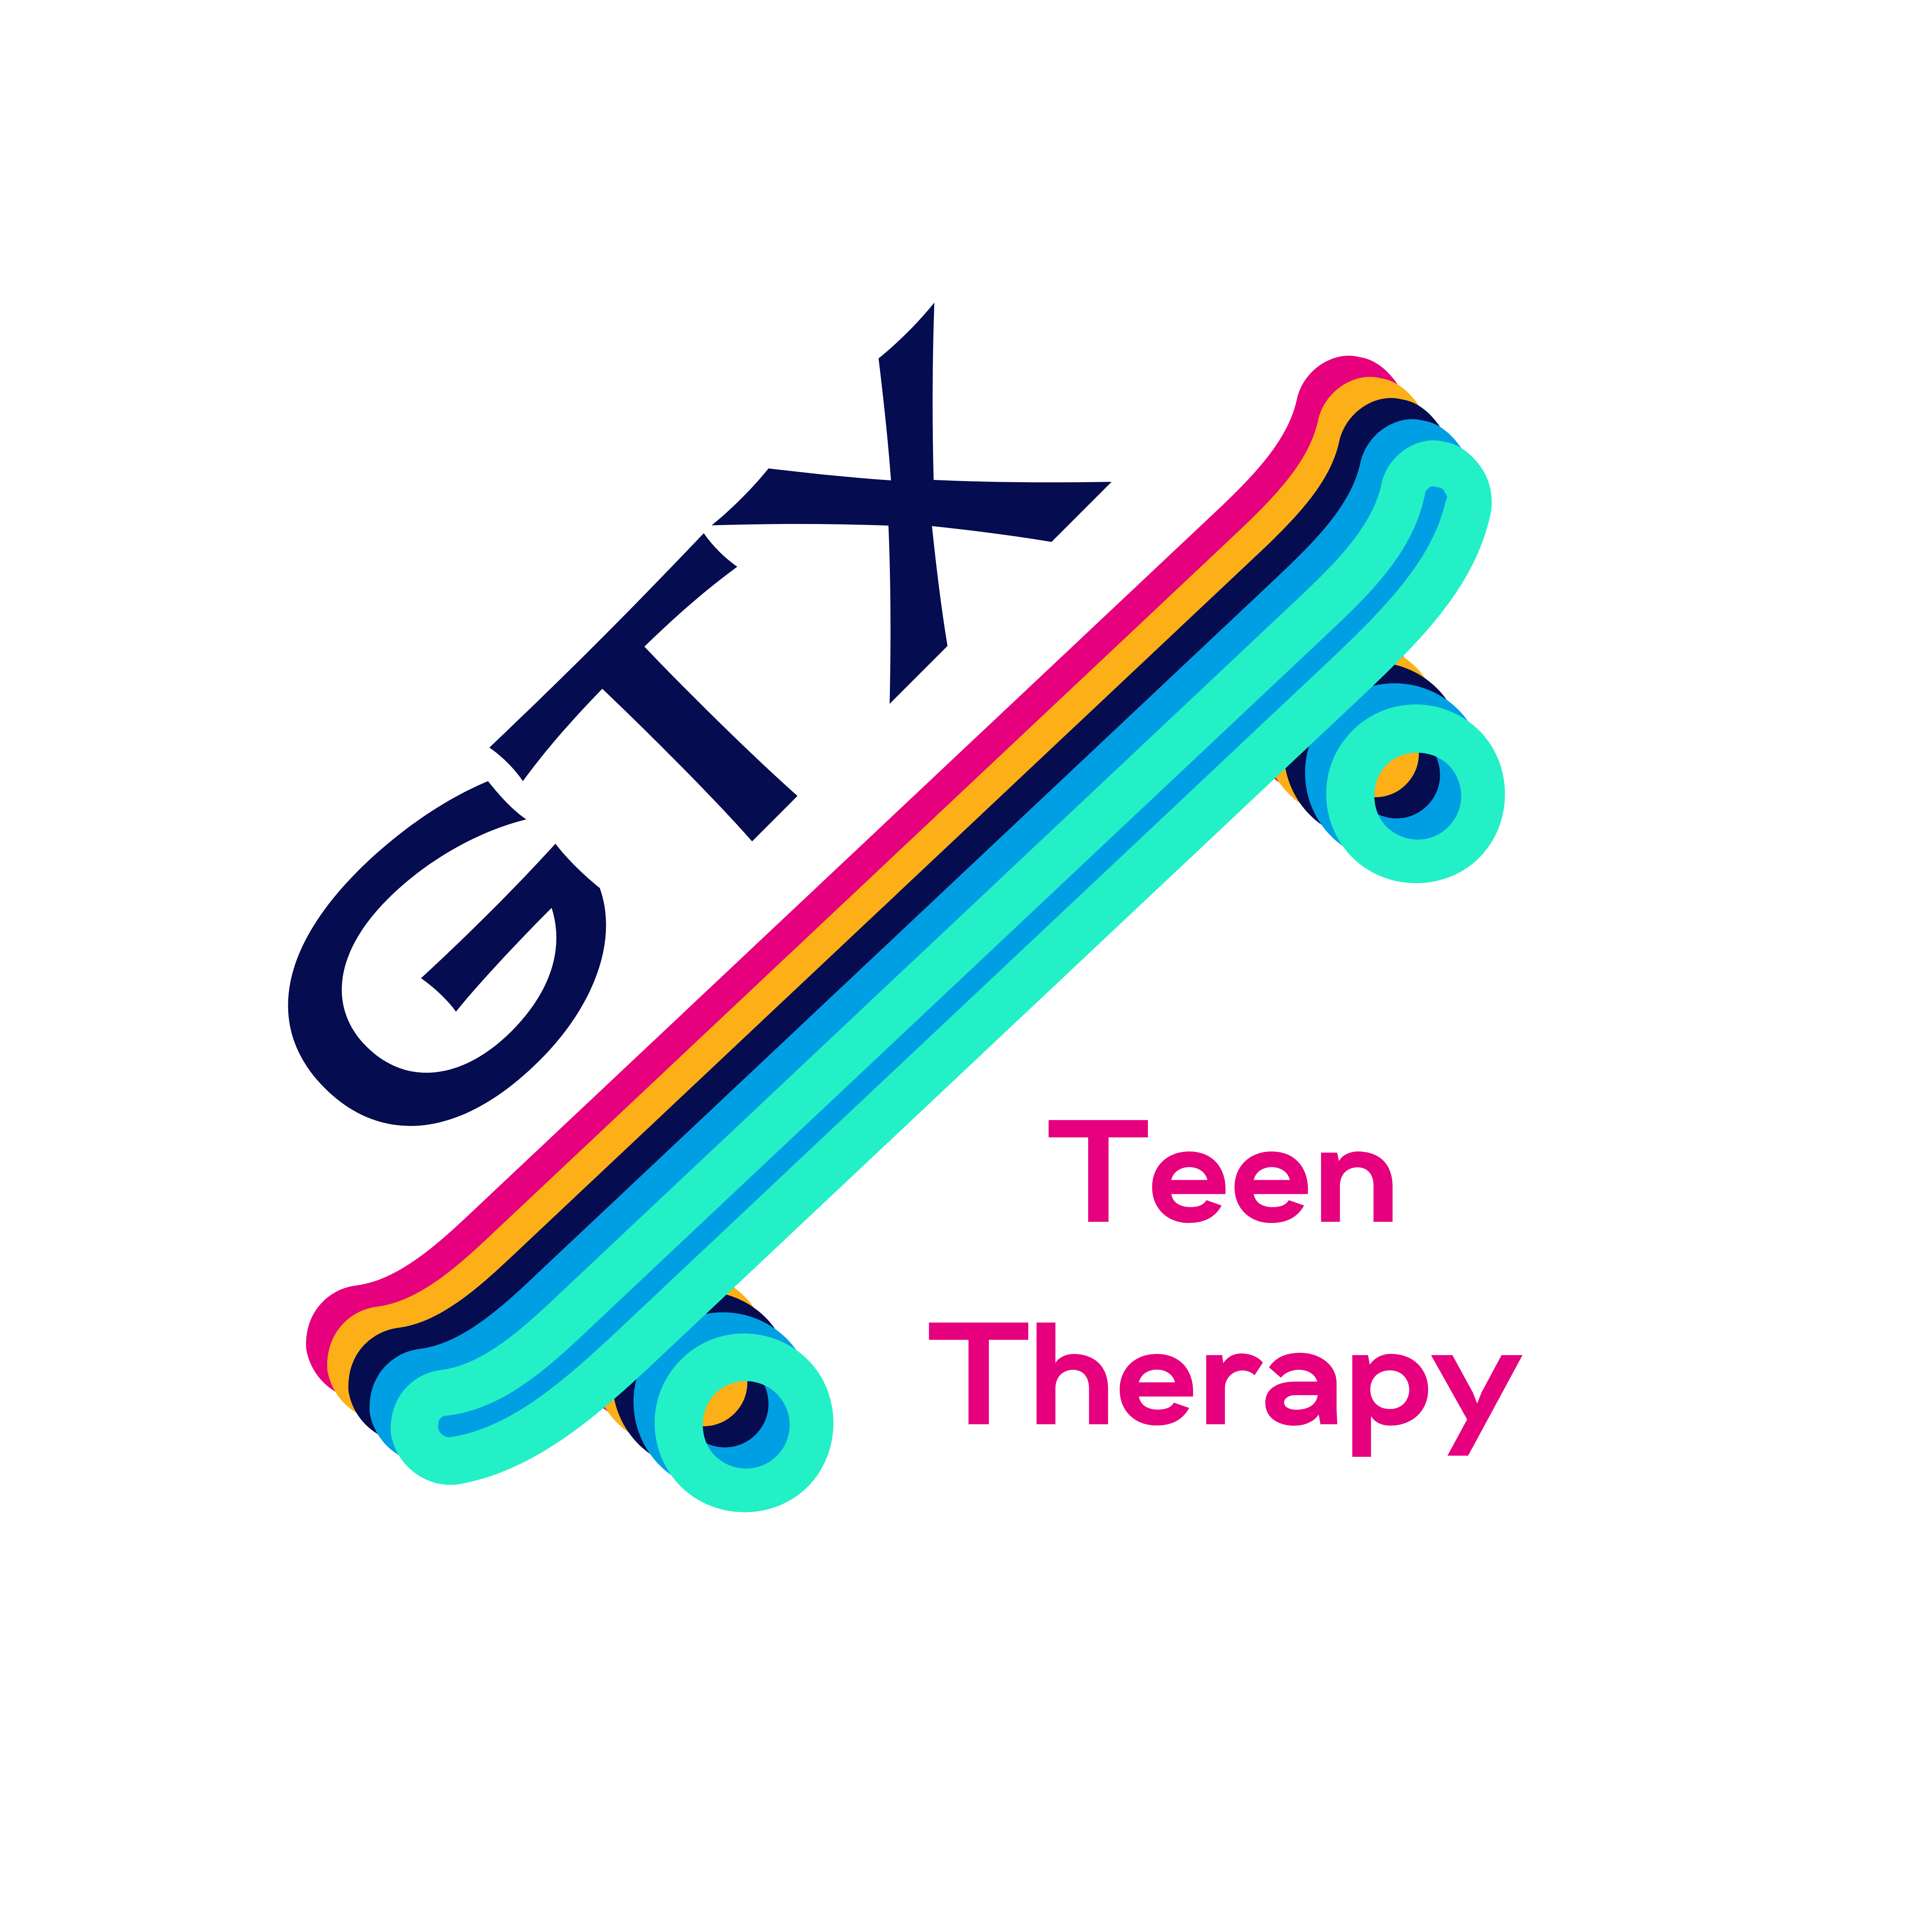 GTX teen therapy